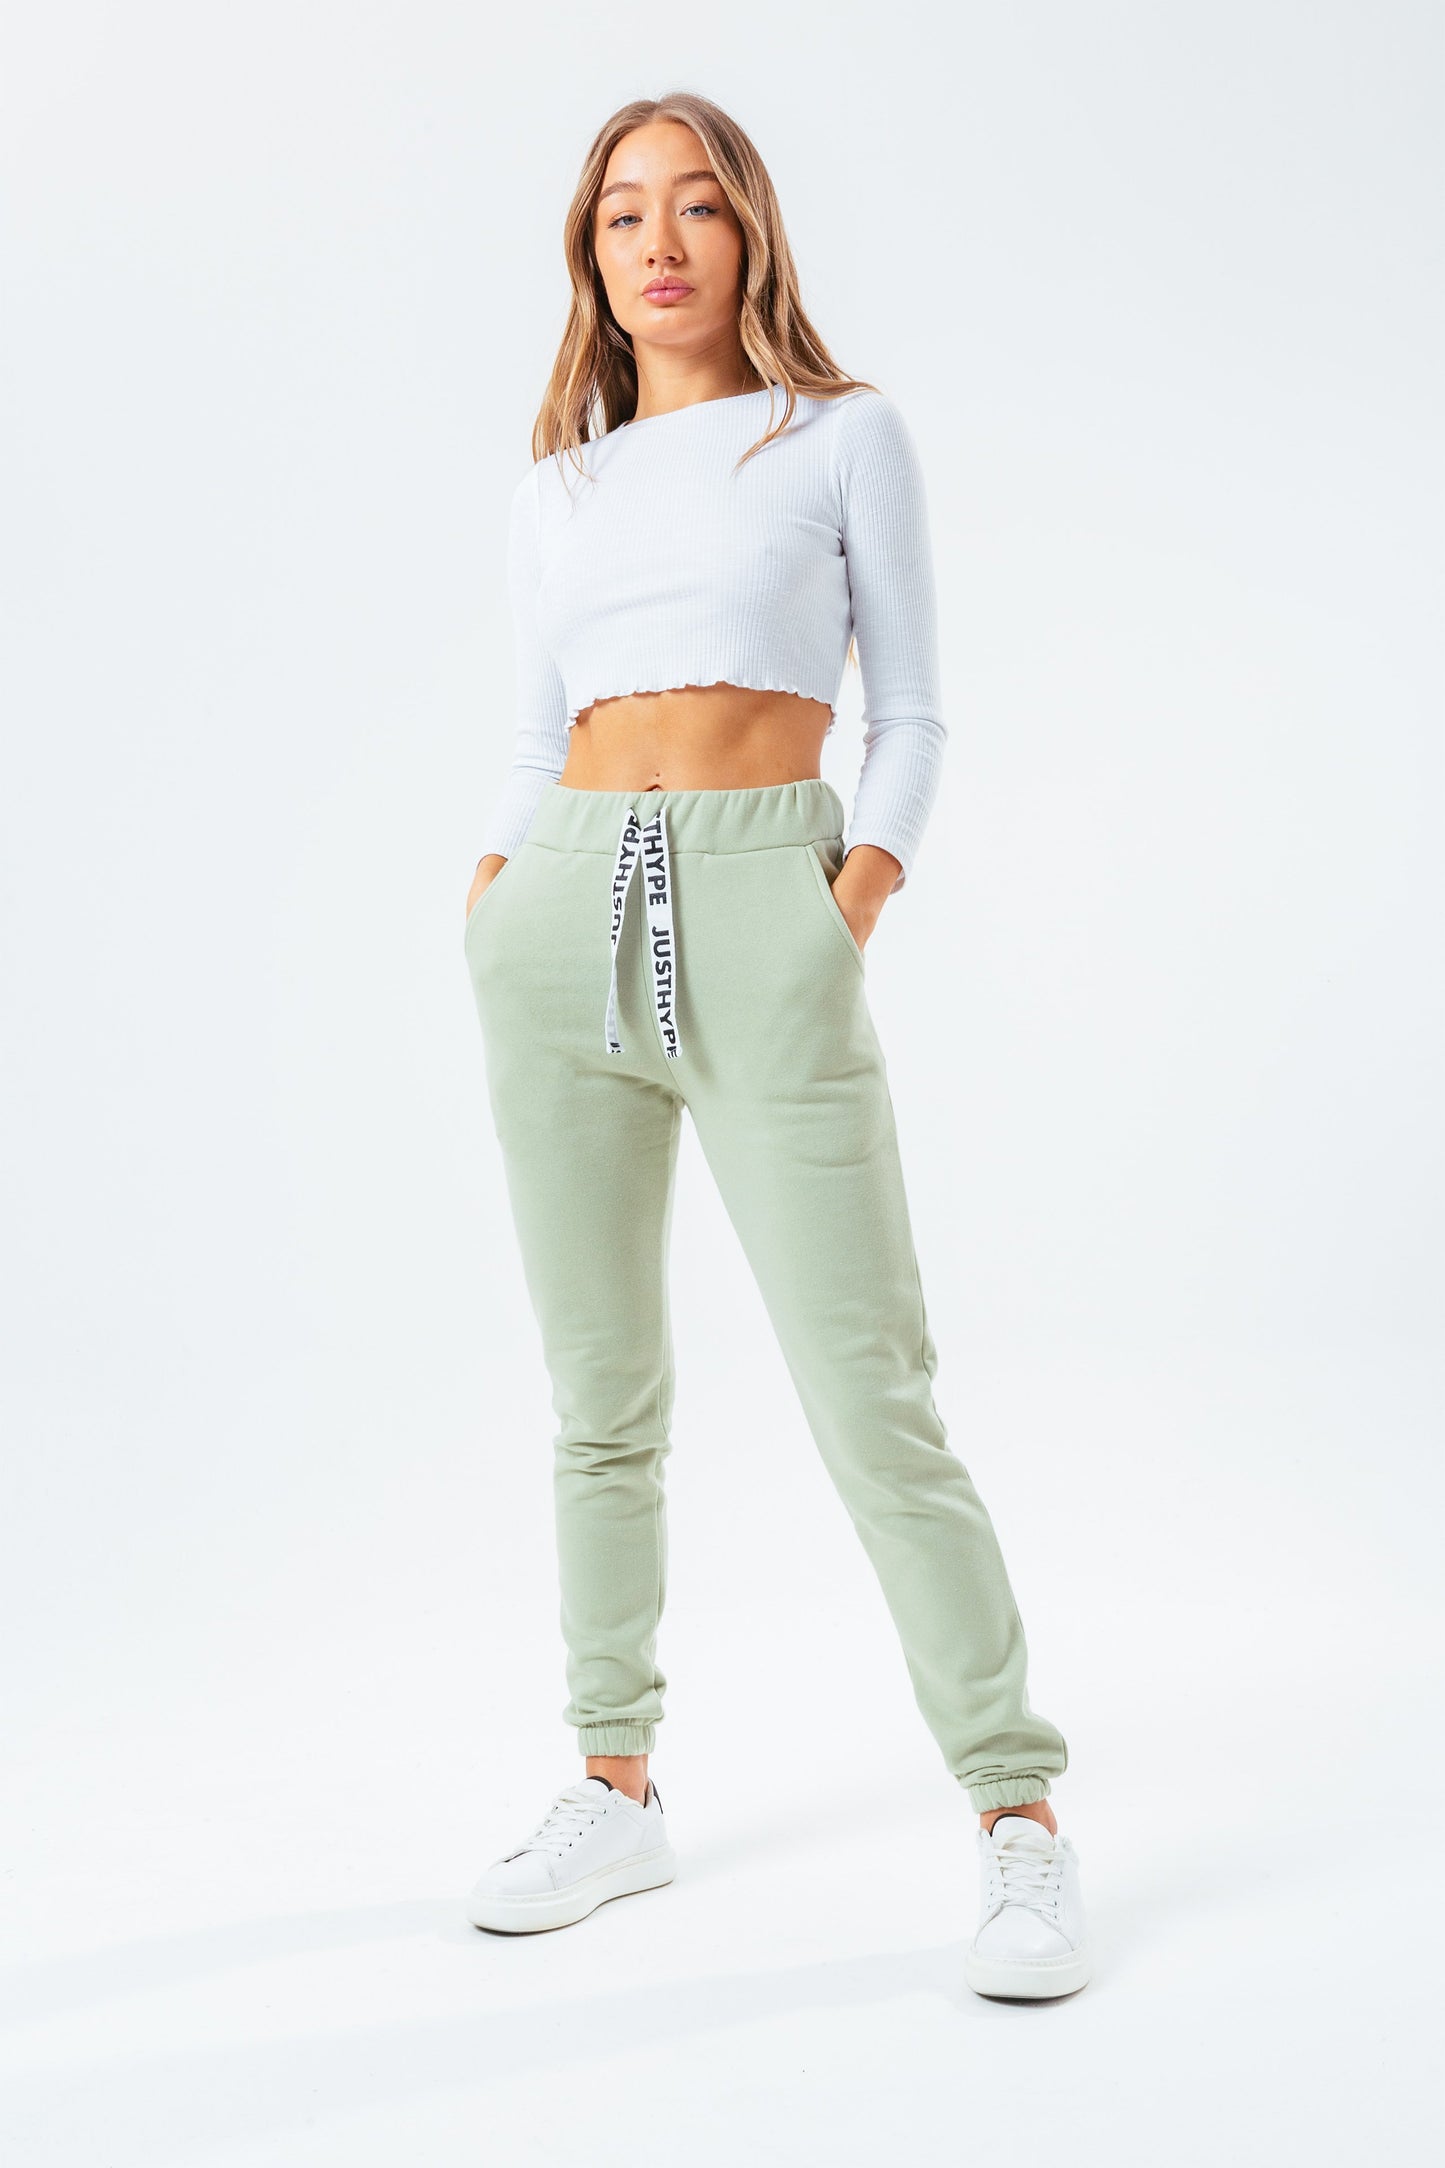 HYPE OLIVE WOMEN'S JOGGERS